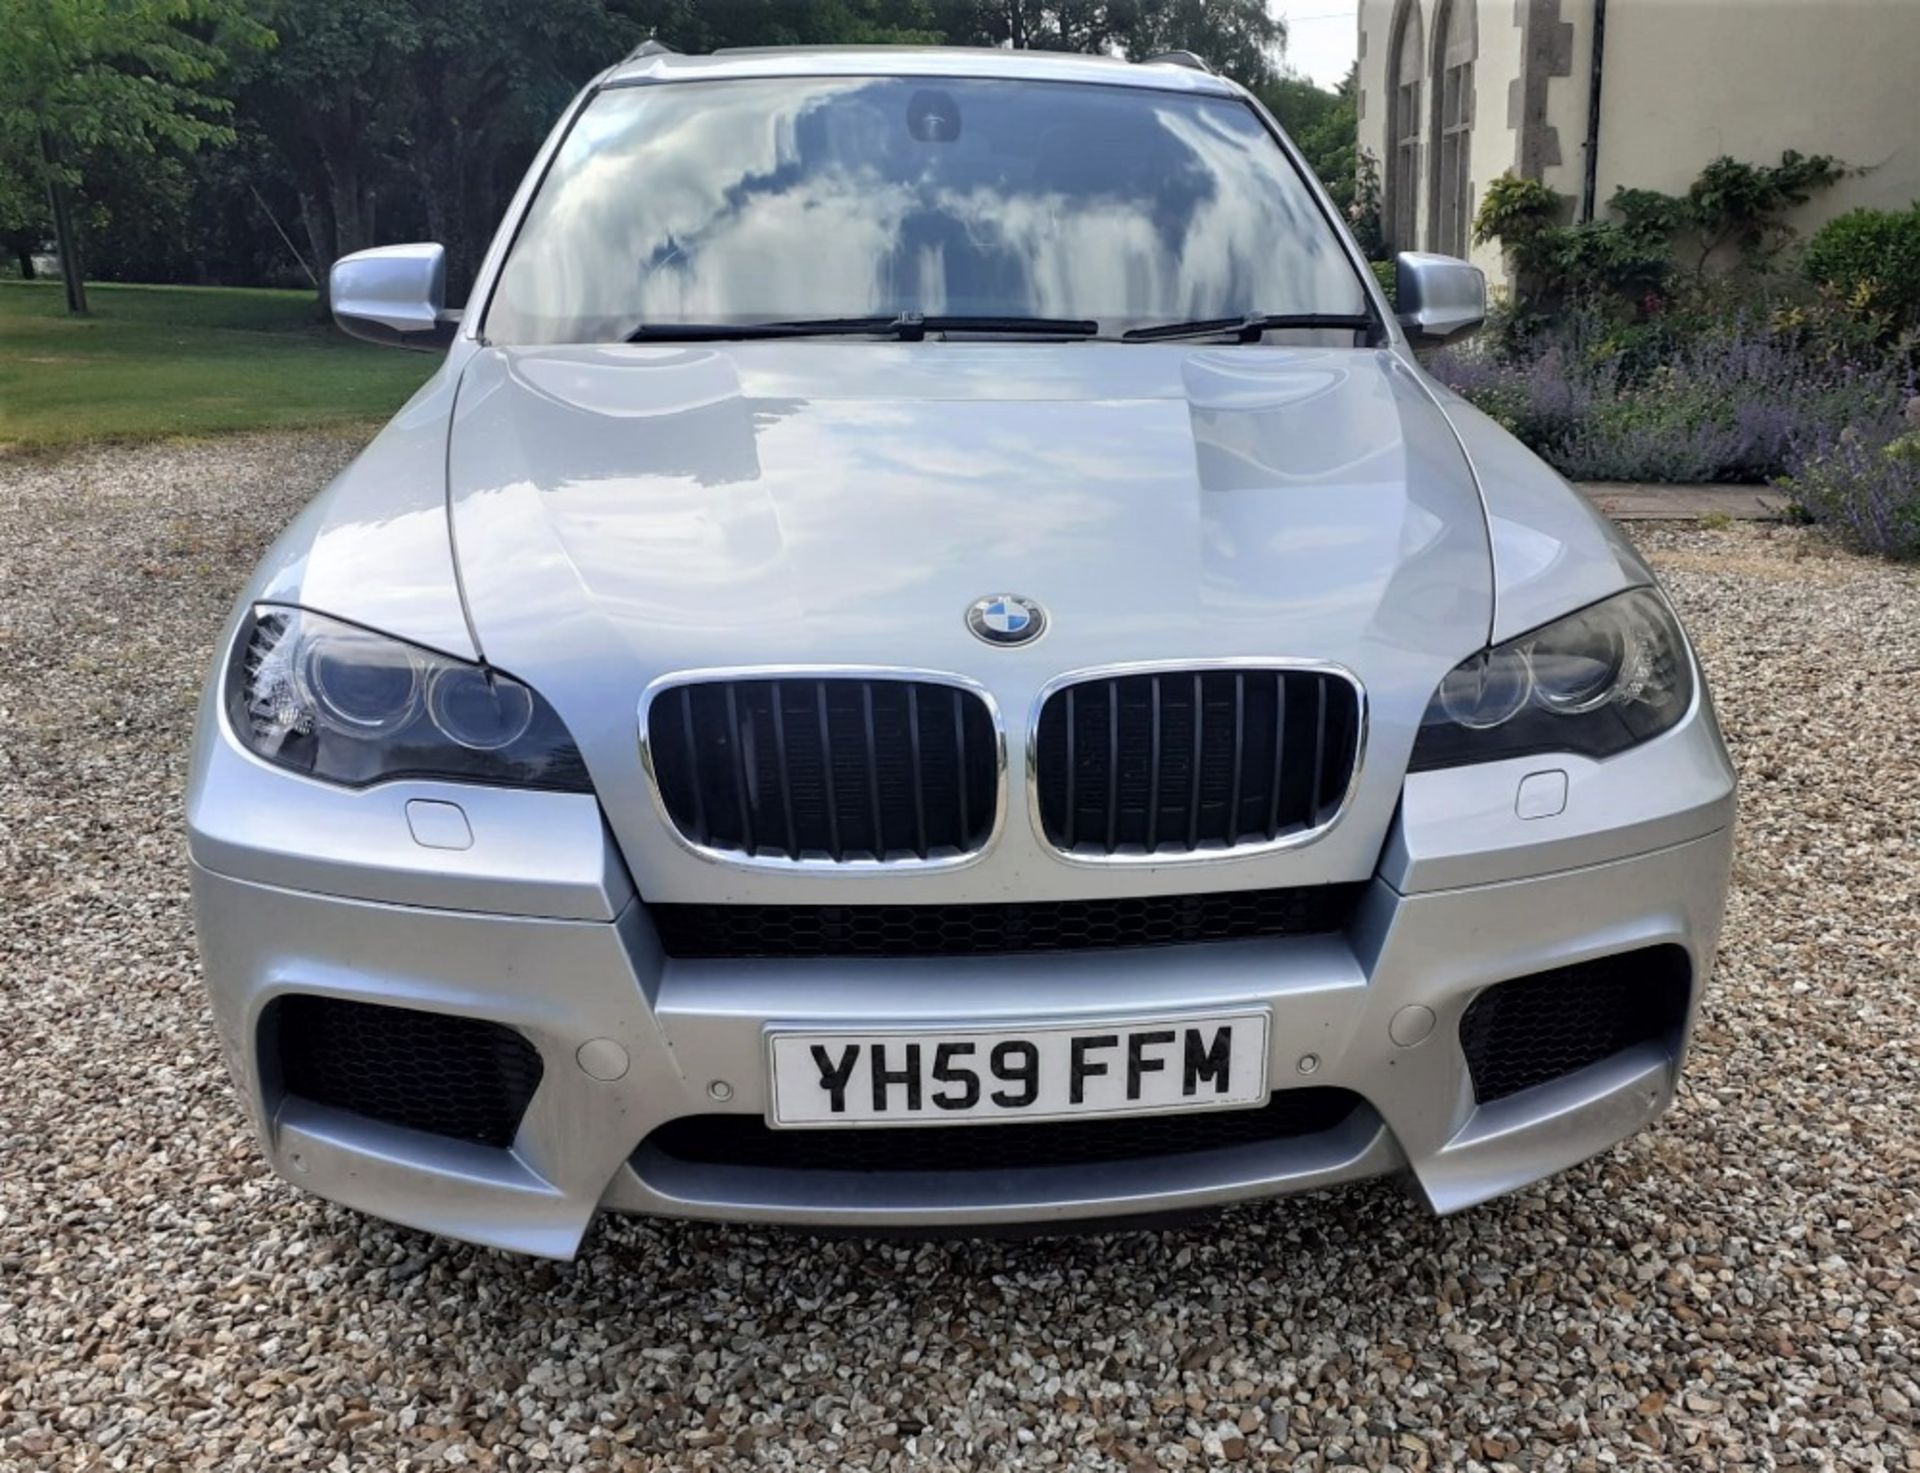 2009 BMW X5 M Registration Number:YH59 FFM Chassis Number: TBA Recorded Mileage: 125,000 miles - Two - Image 3 of 17